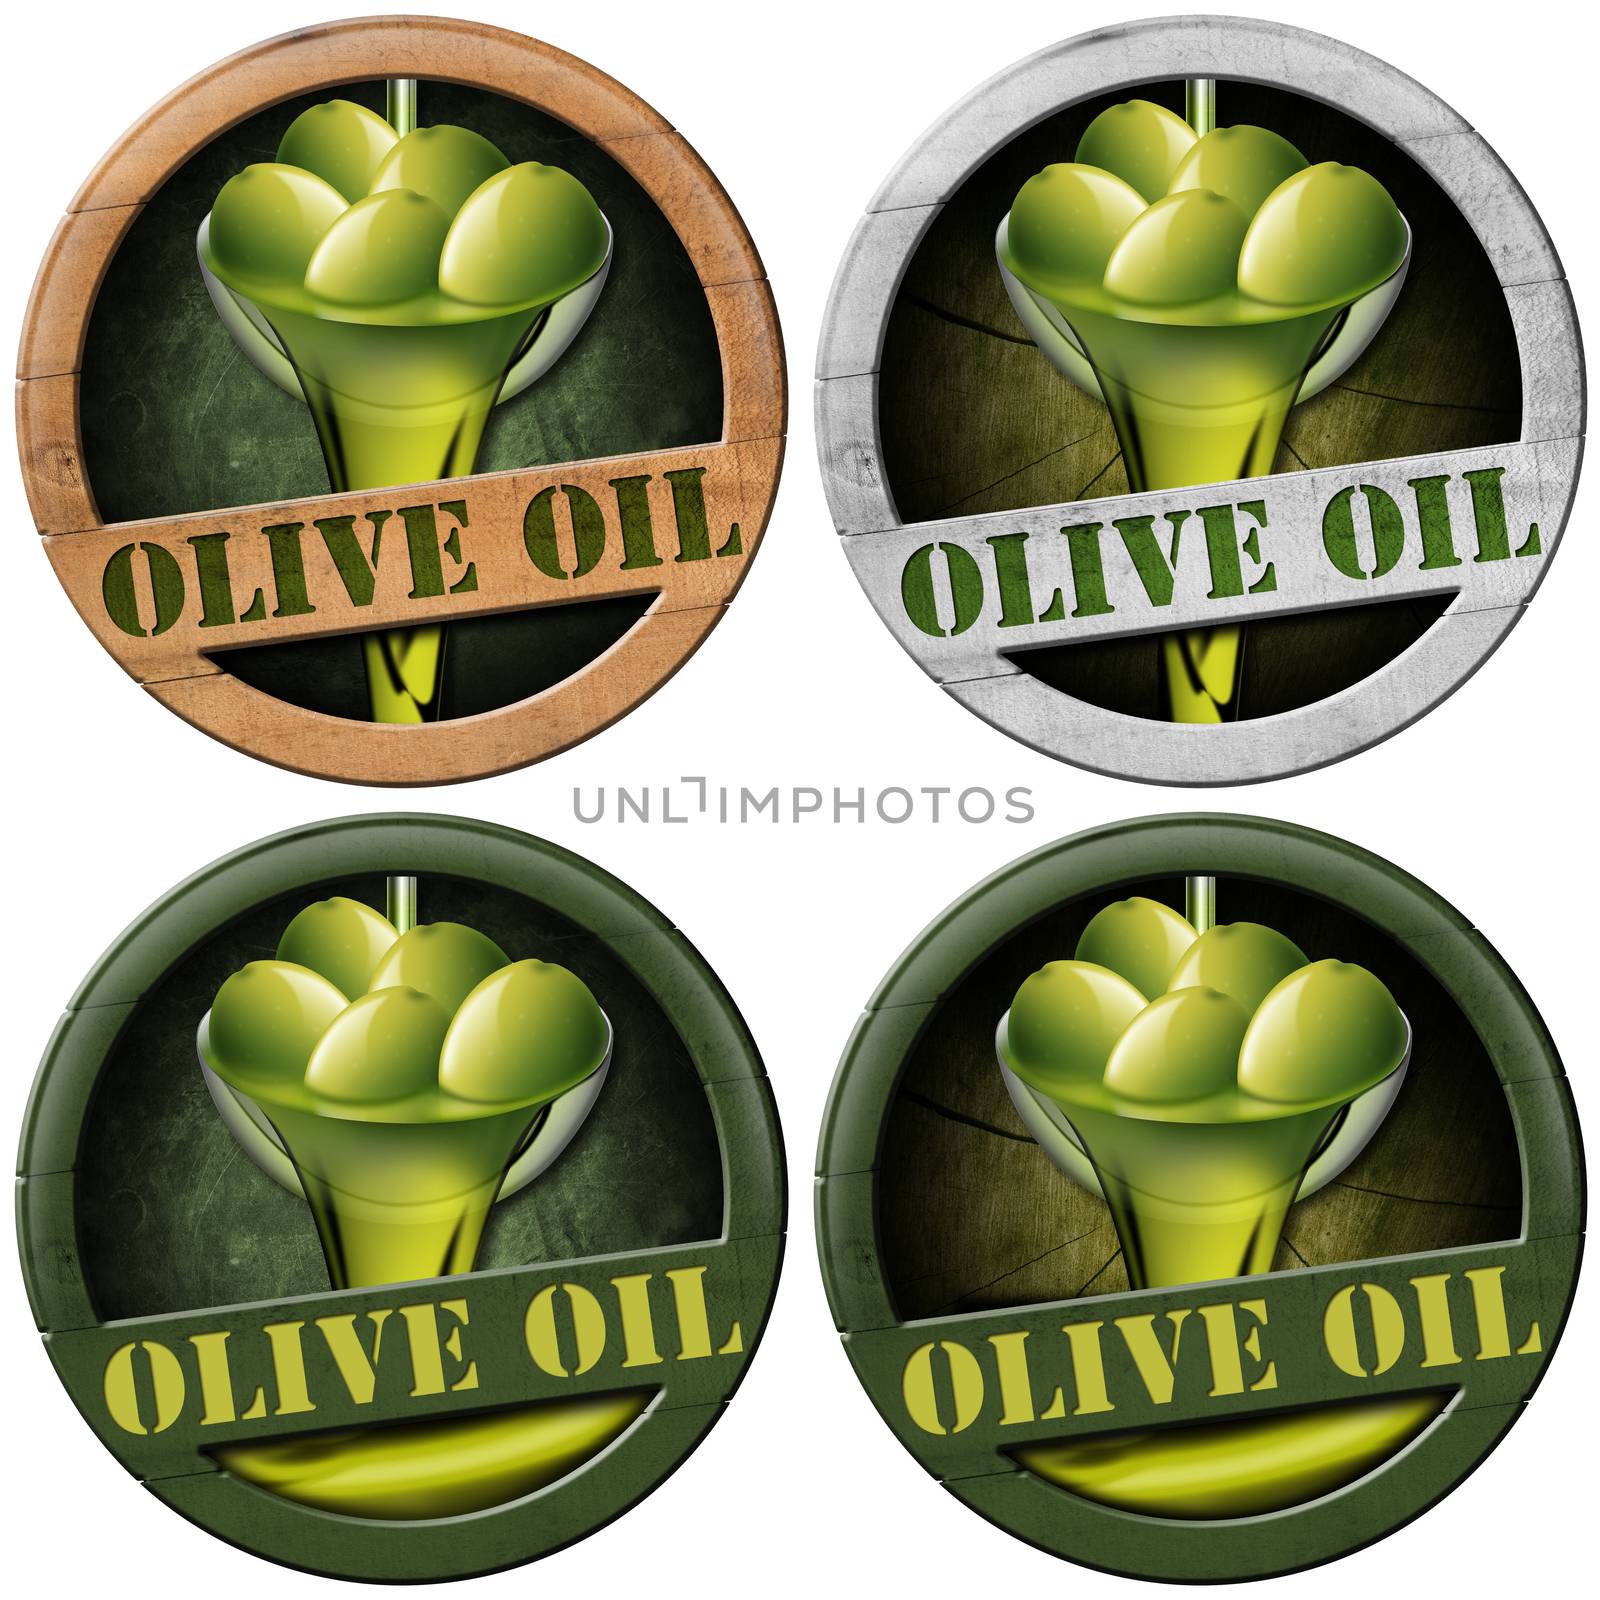 Collections of wooden icons or symbols with green olives and oil, text Olive oil. Isolated on white background